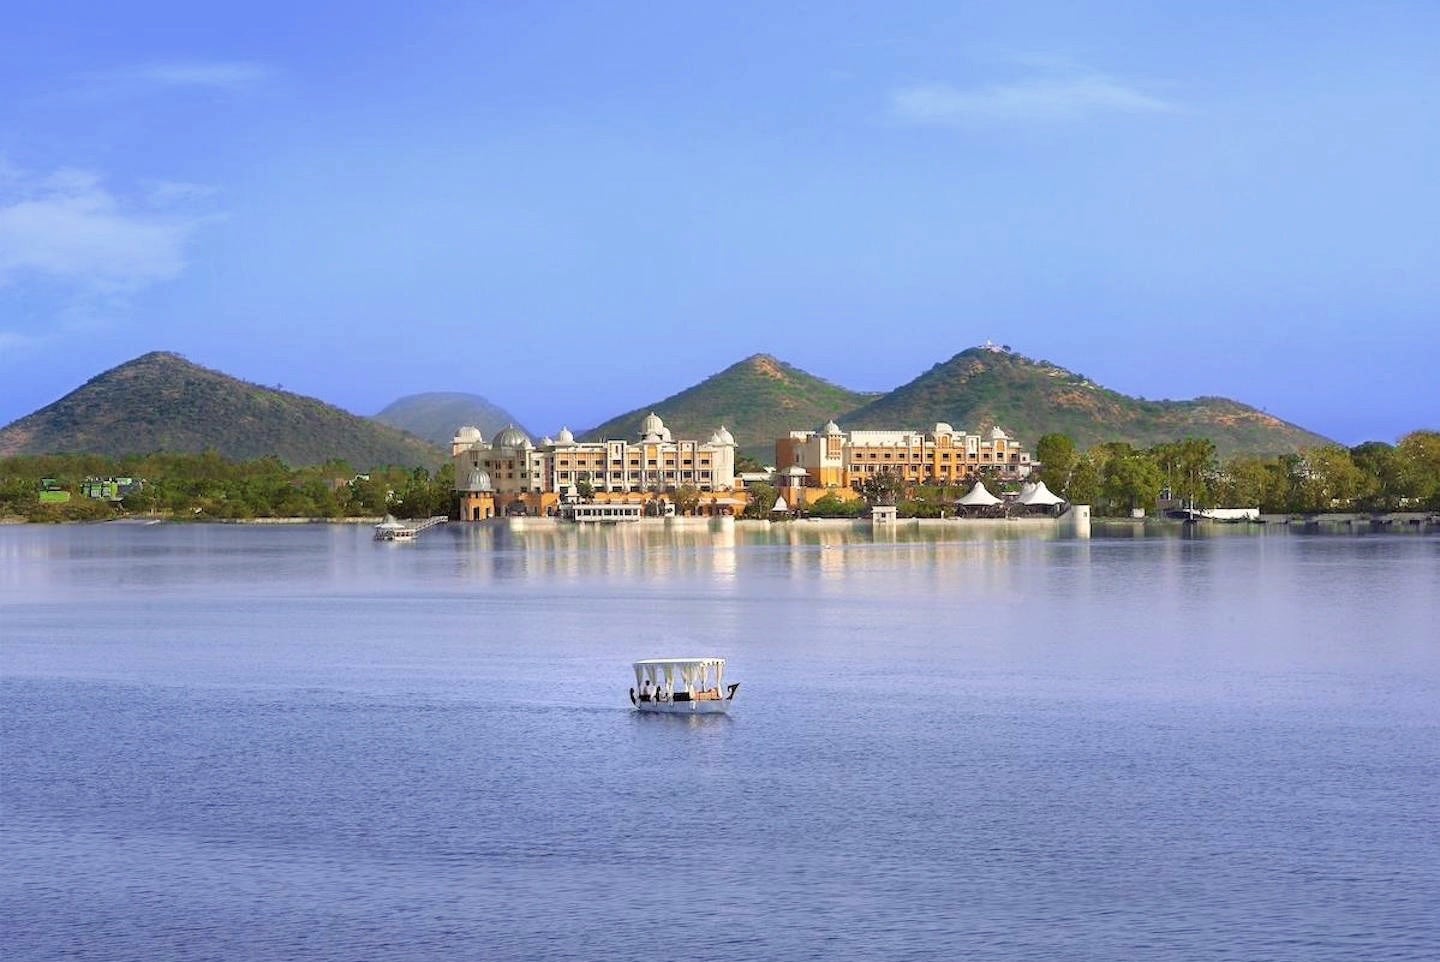 The Leela Palace Hotel best hotels in Udaipur India